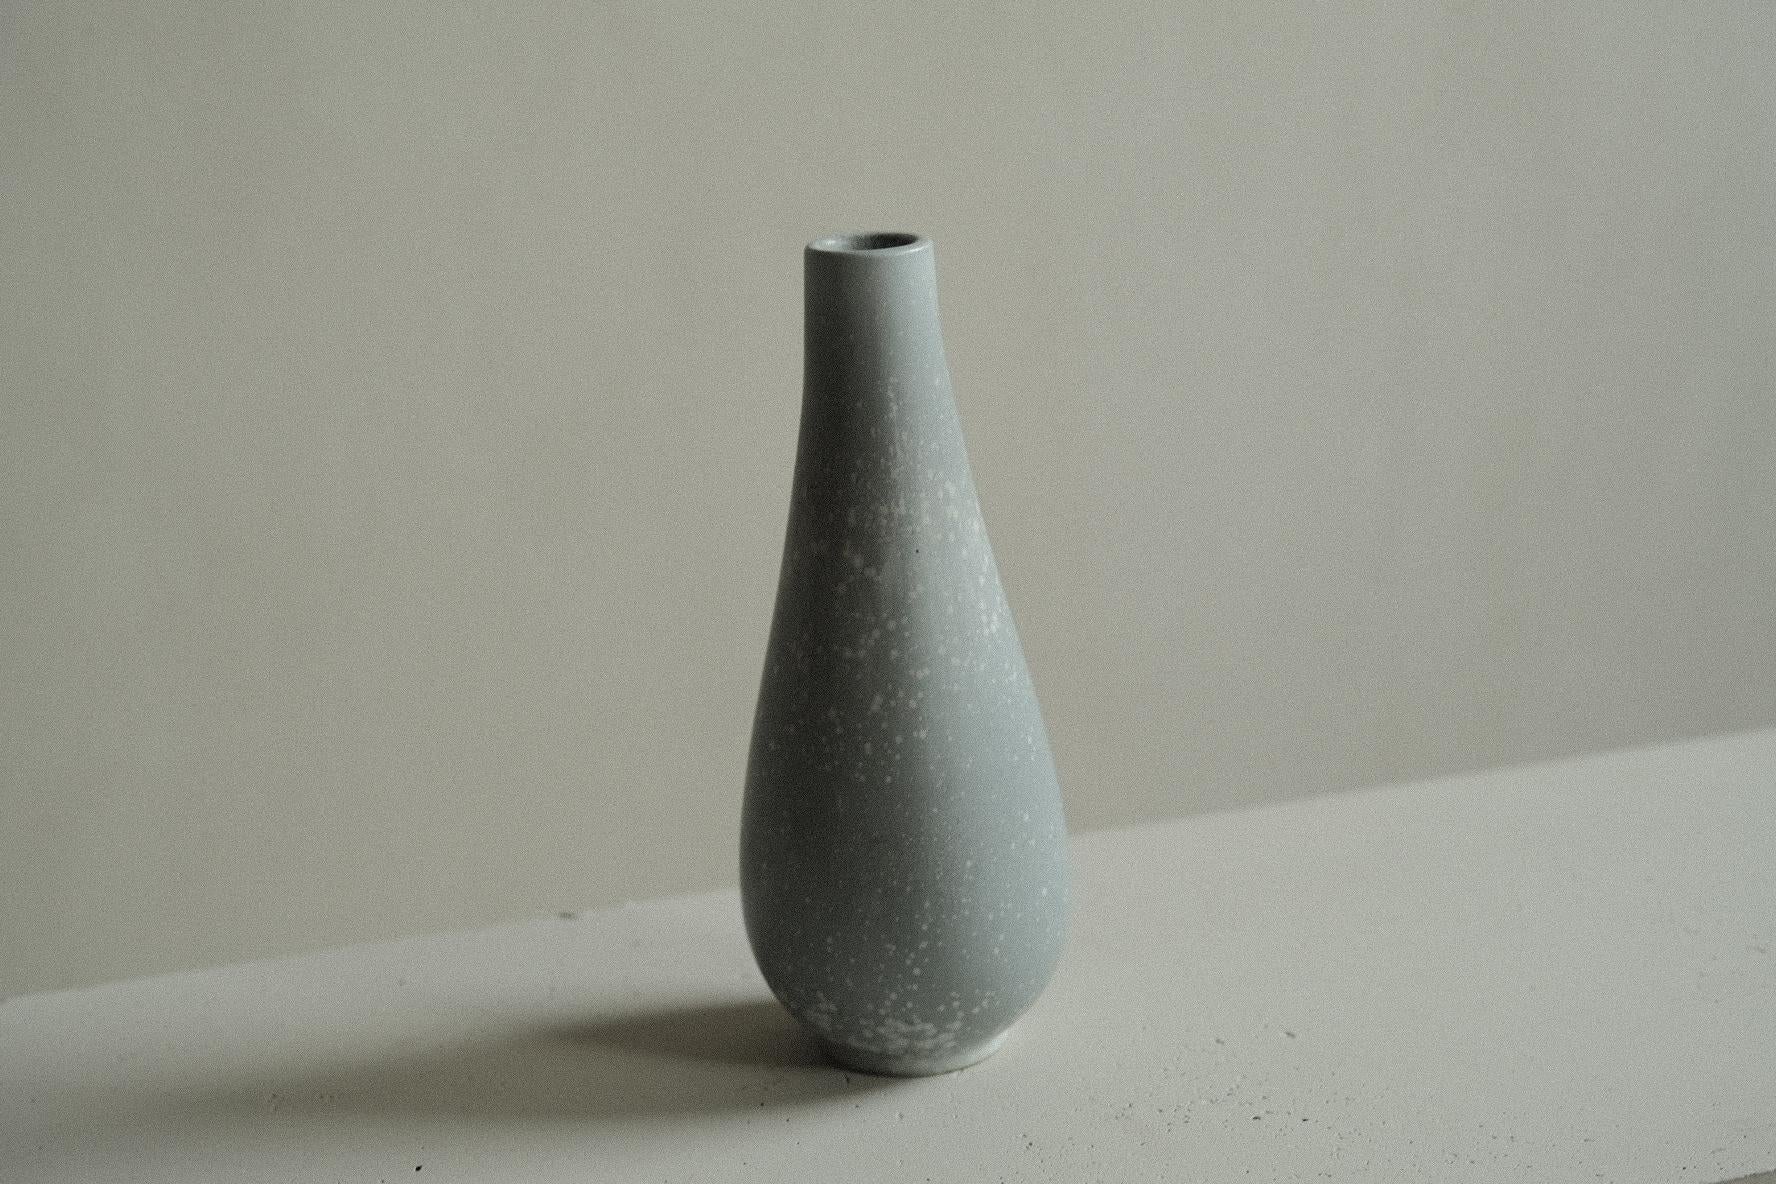 Stoneware vase in a clean form by Gunnar Nylund, the undulating rim softens the form. Light blue glaze.

Signed underneath. 

Gunnar Nylund was one of the most influential ceramicists and designers of the Swedish mid-century period. Nylund worked